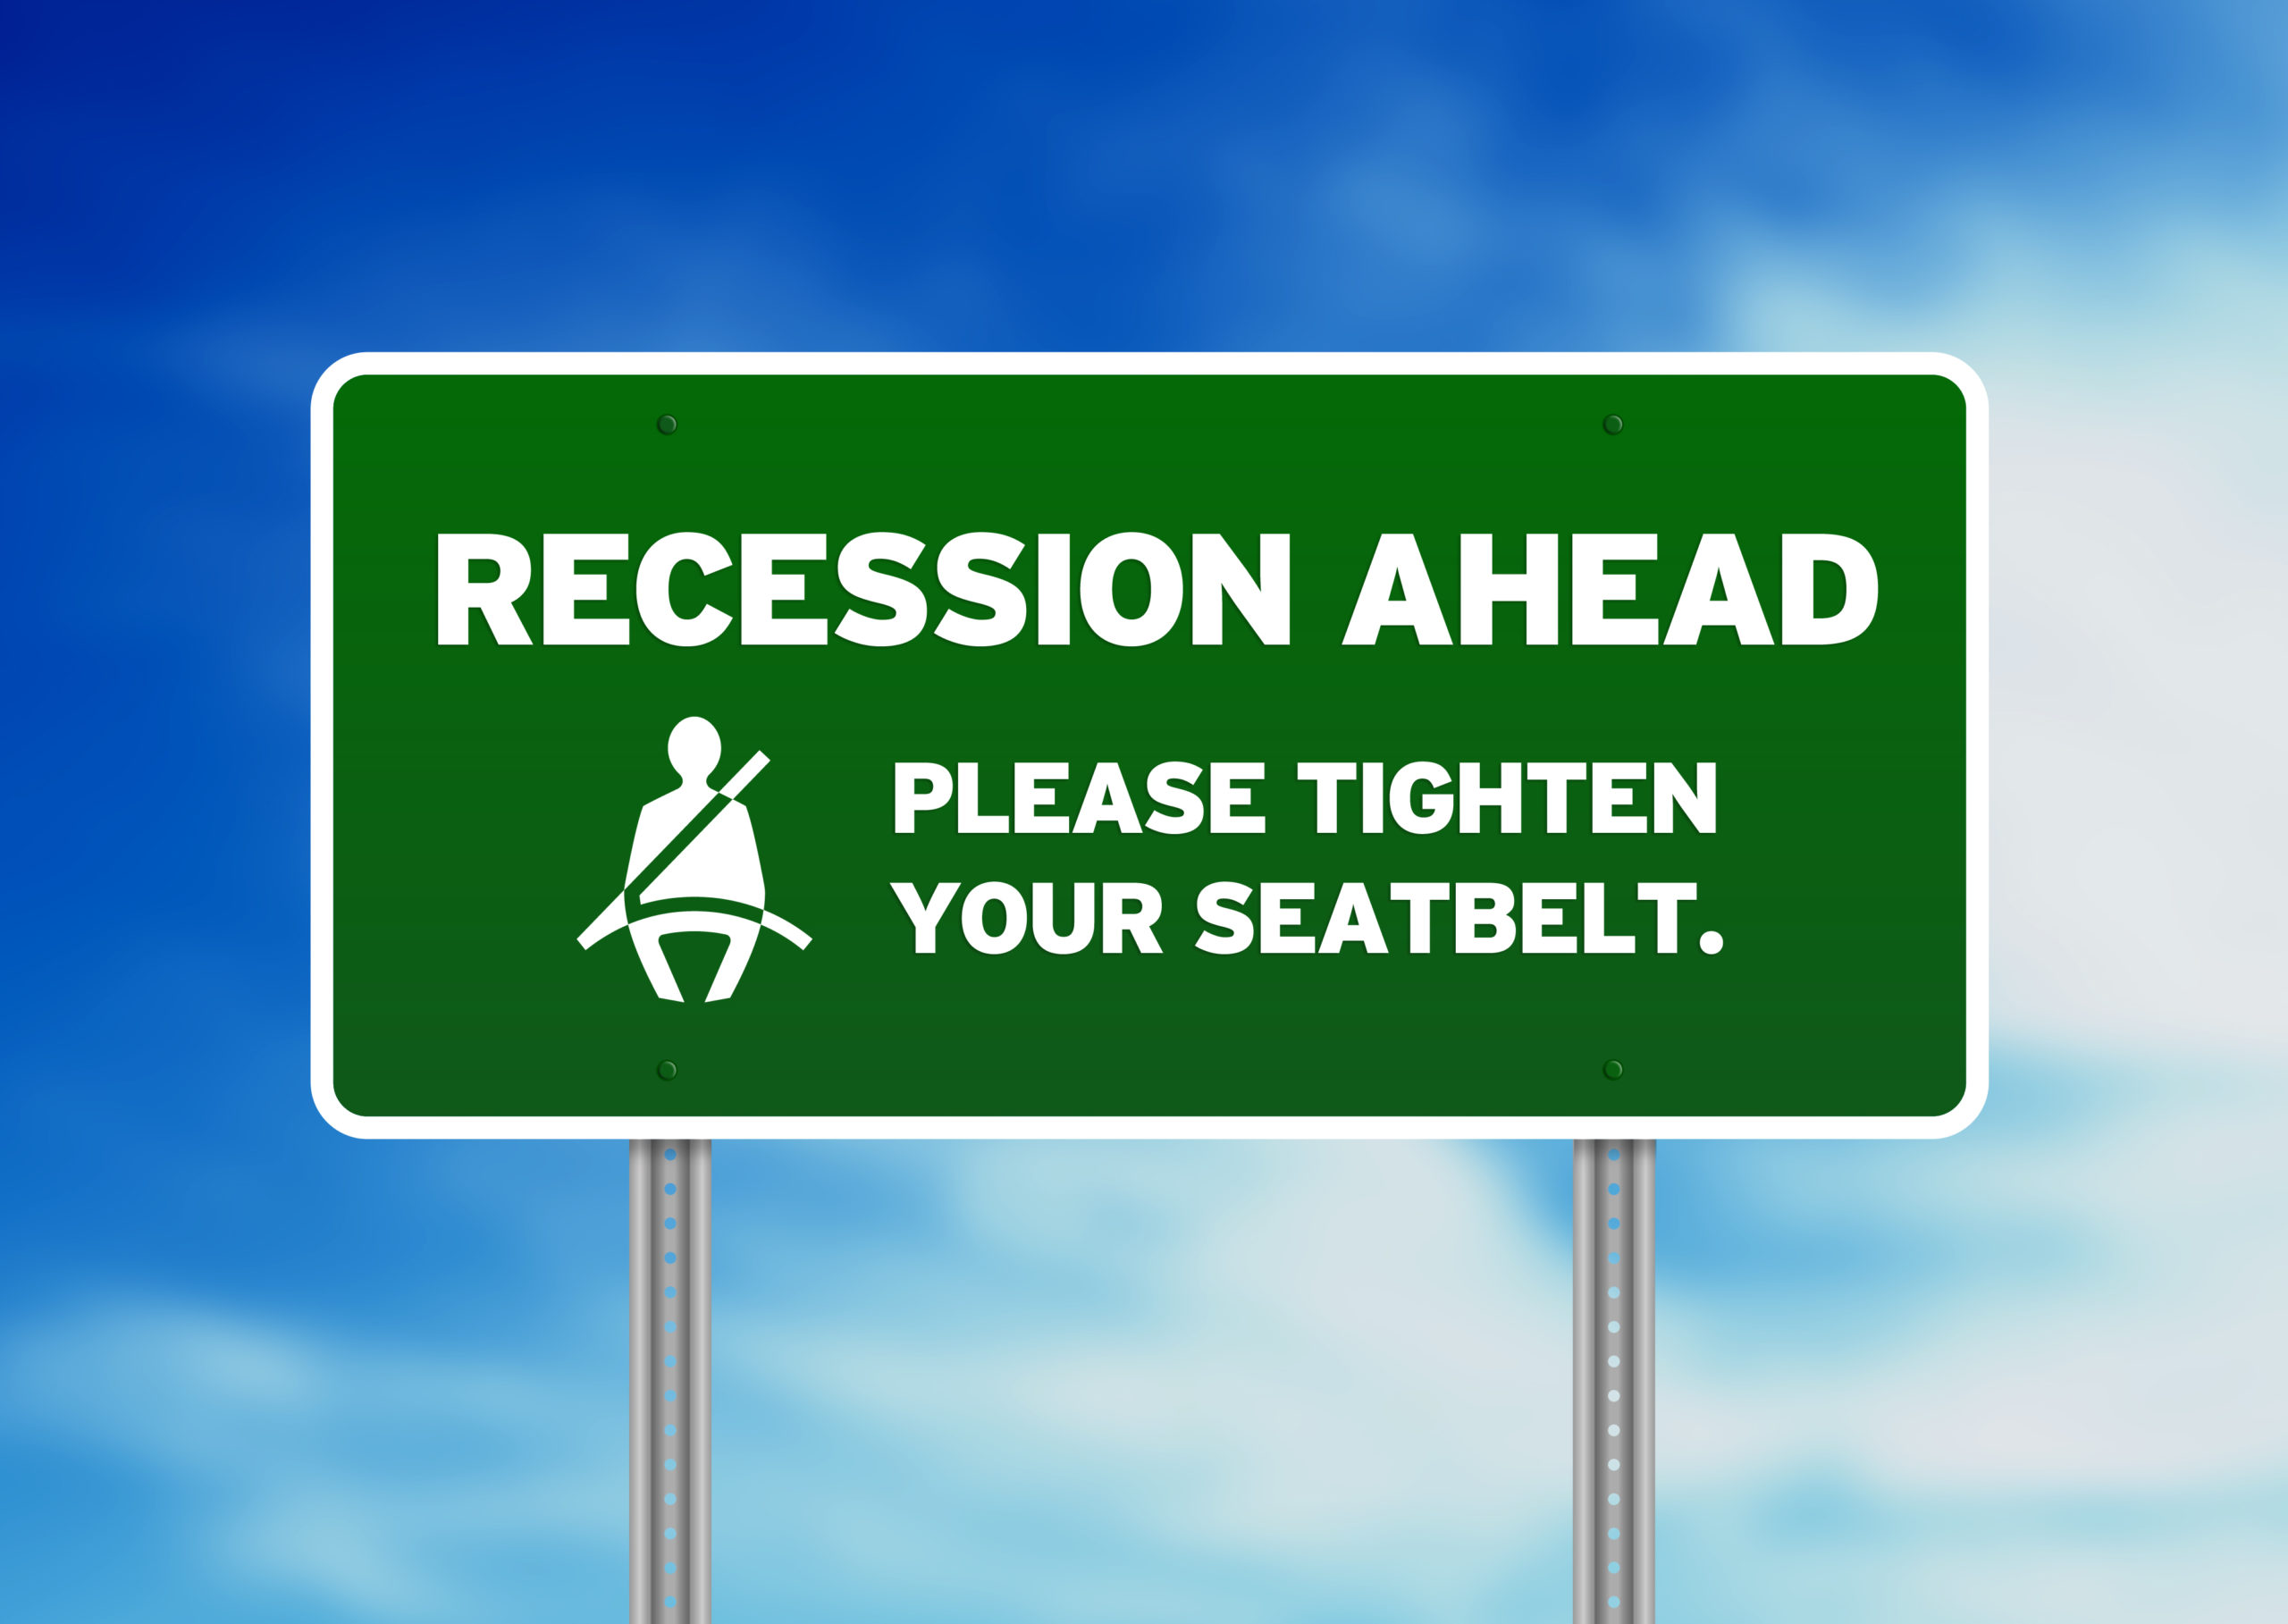 13 Stocks That Make More Money During Recession (Our Top Picks)